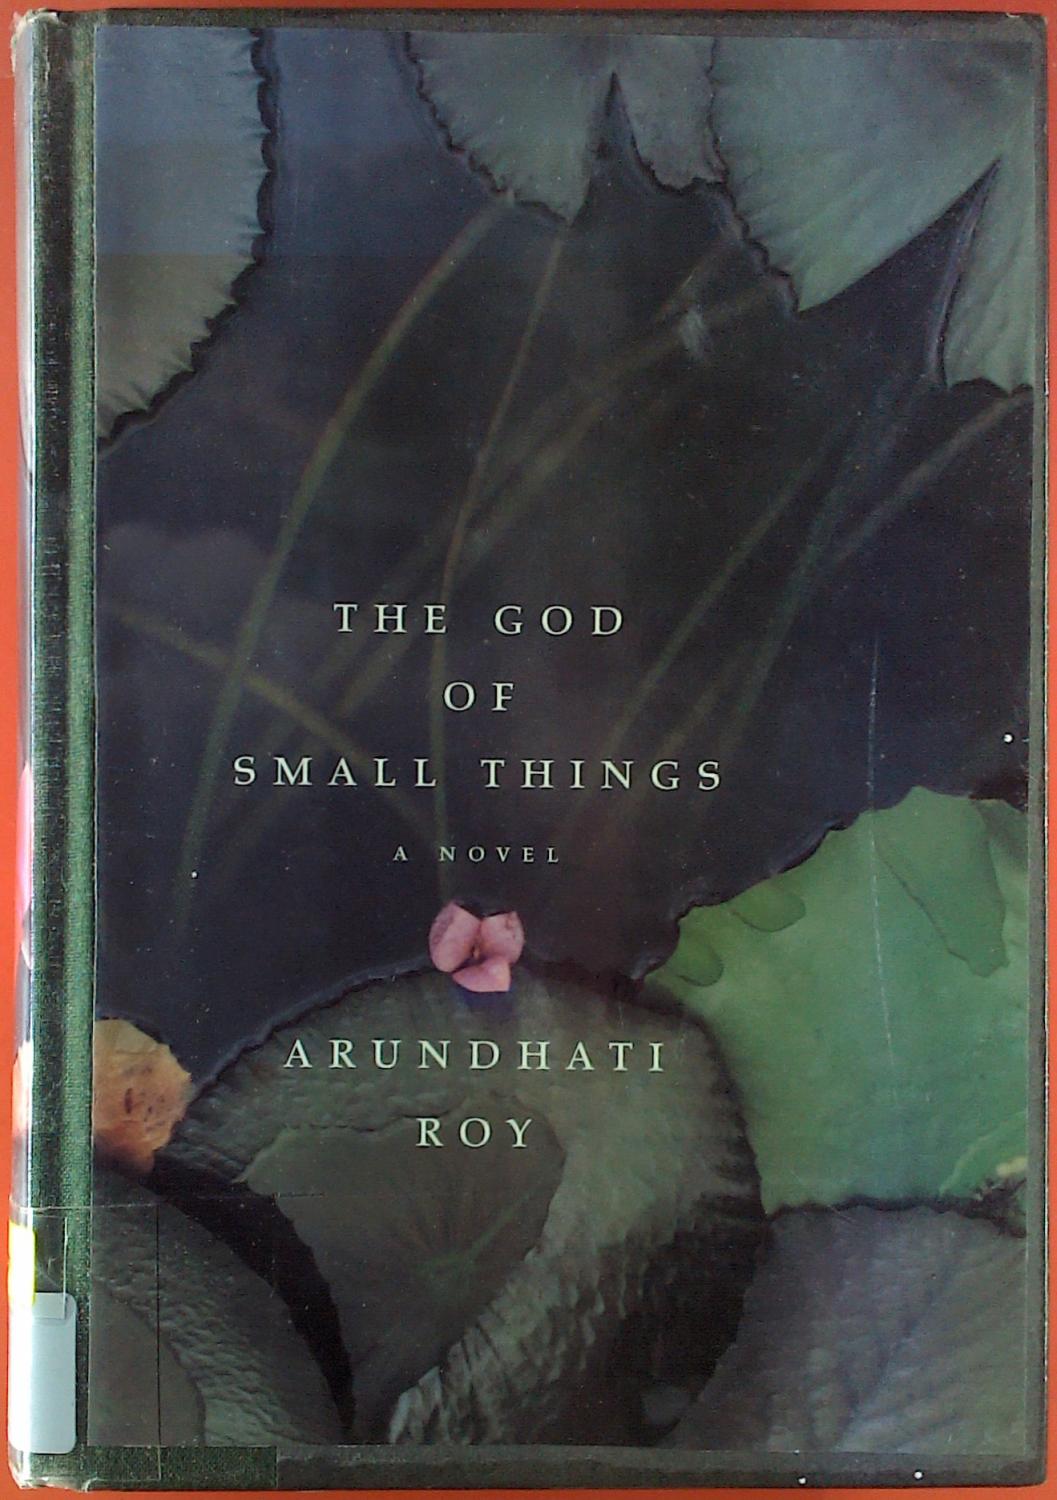 The God of Small Things. A Novel. - Arundhati Roy